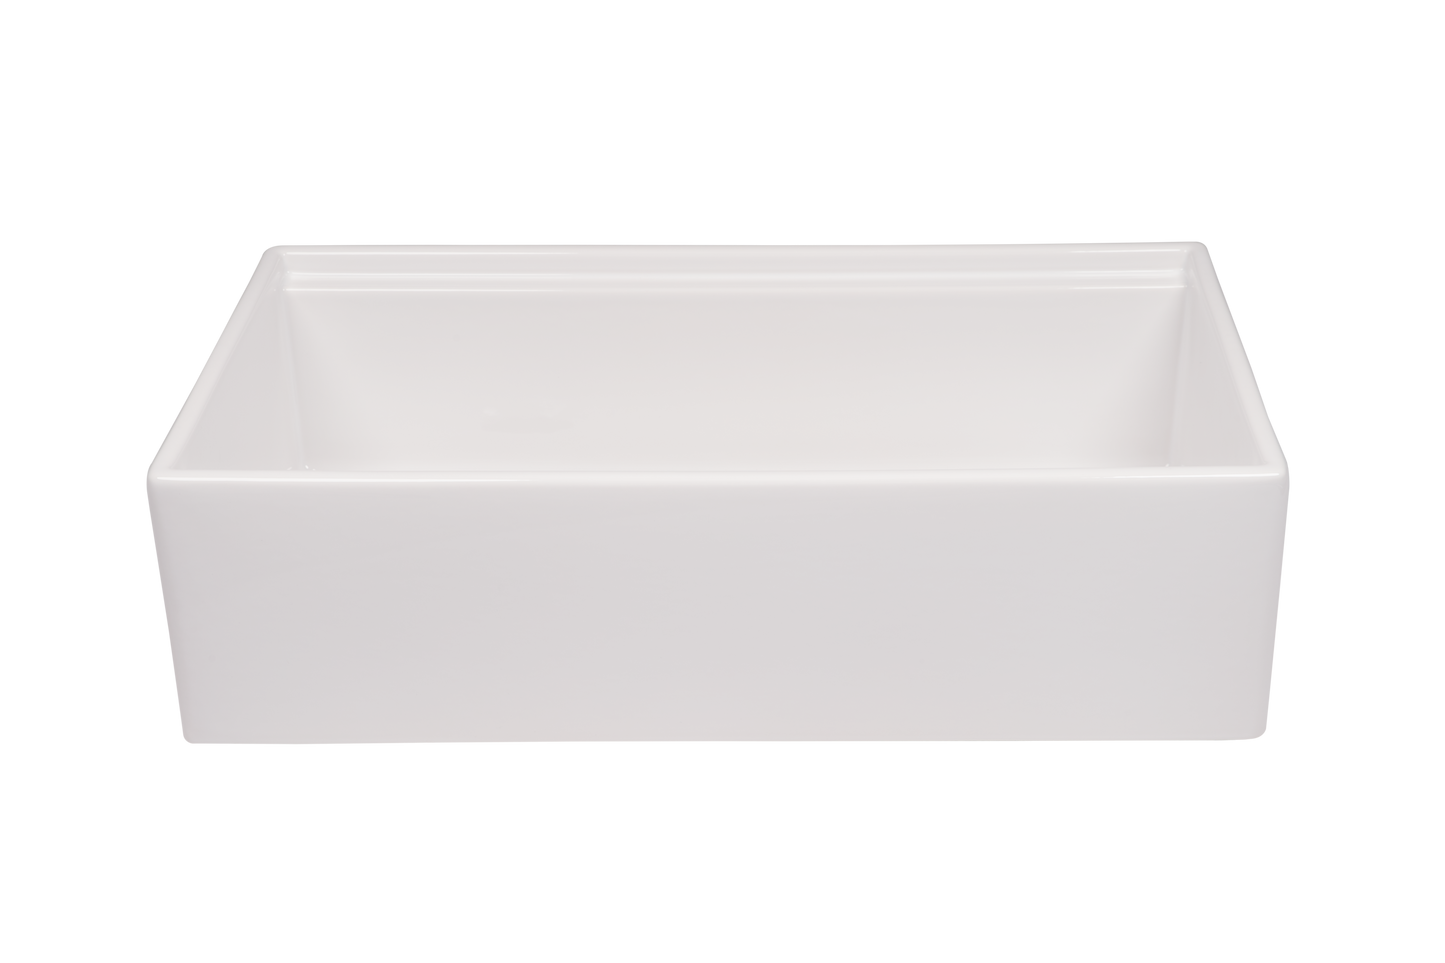 Farmhouse Sink With Chopping Board & Grate - 761mm